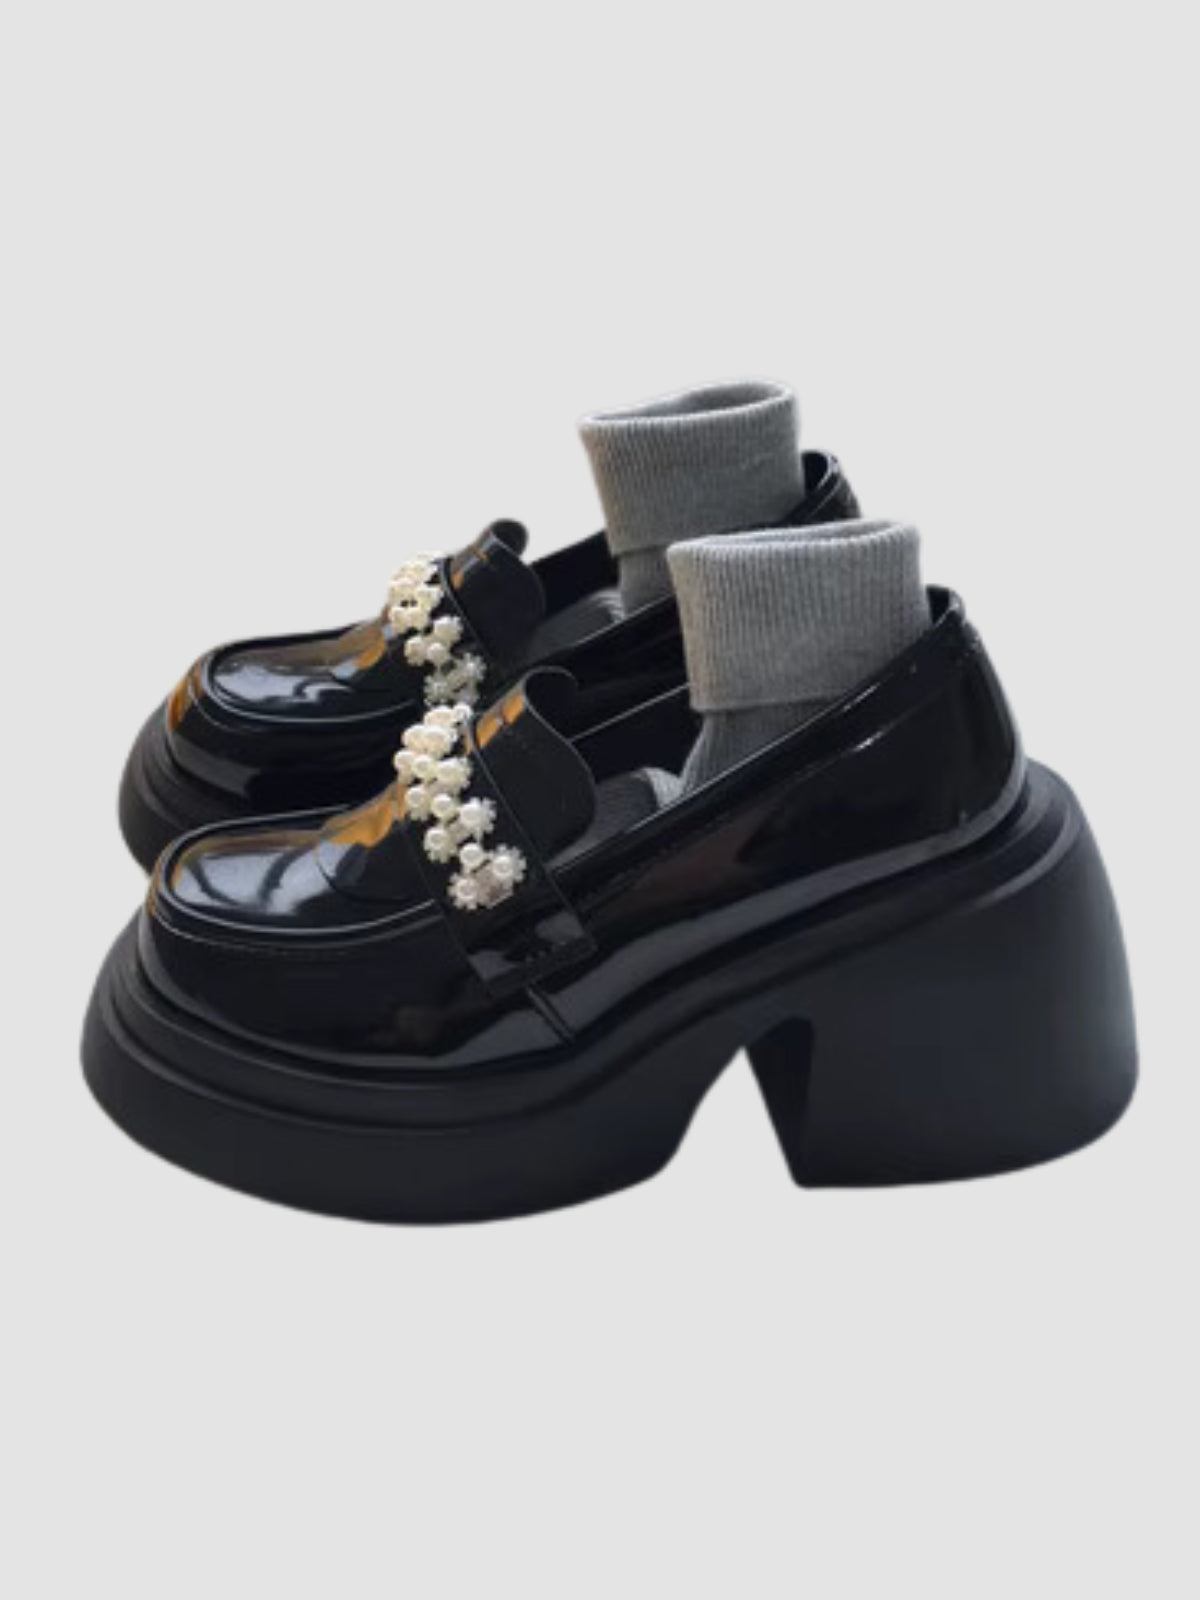 WLS Thick High Heeled Leather Women Shoes